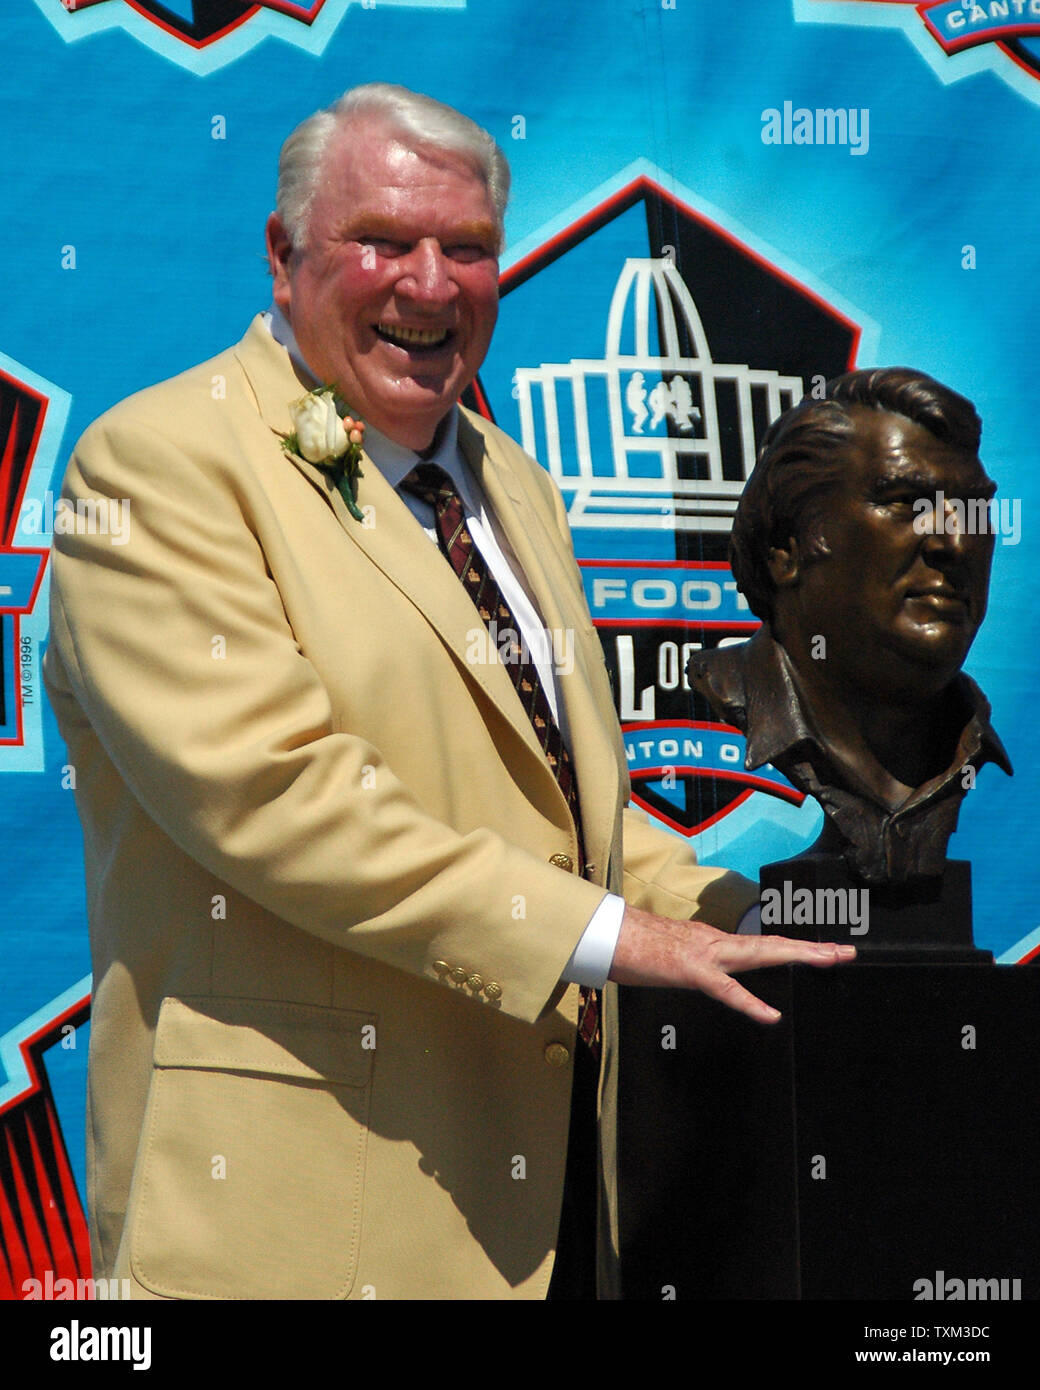 John Madden poses for the media at the enshrinement ceremony at the Football Hall of Fame on August 5, 2006 in Canton, Ohio. (UPI Photo/Stephanie Krell) Stock Photo